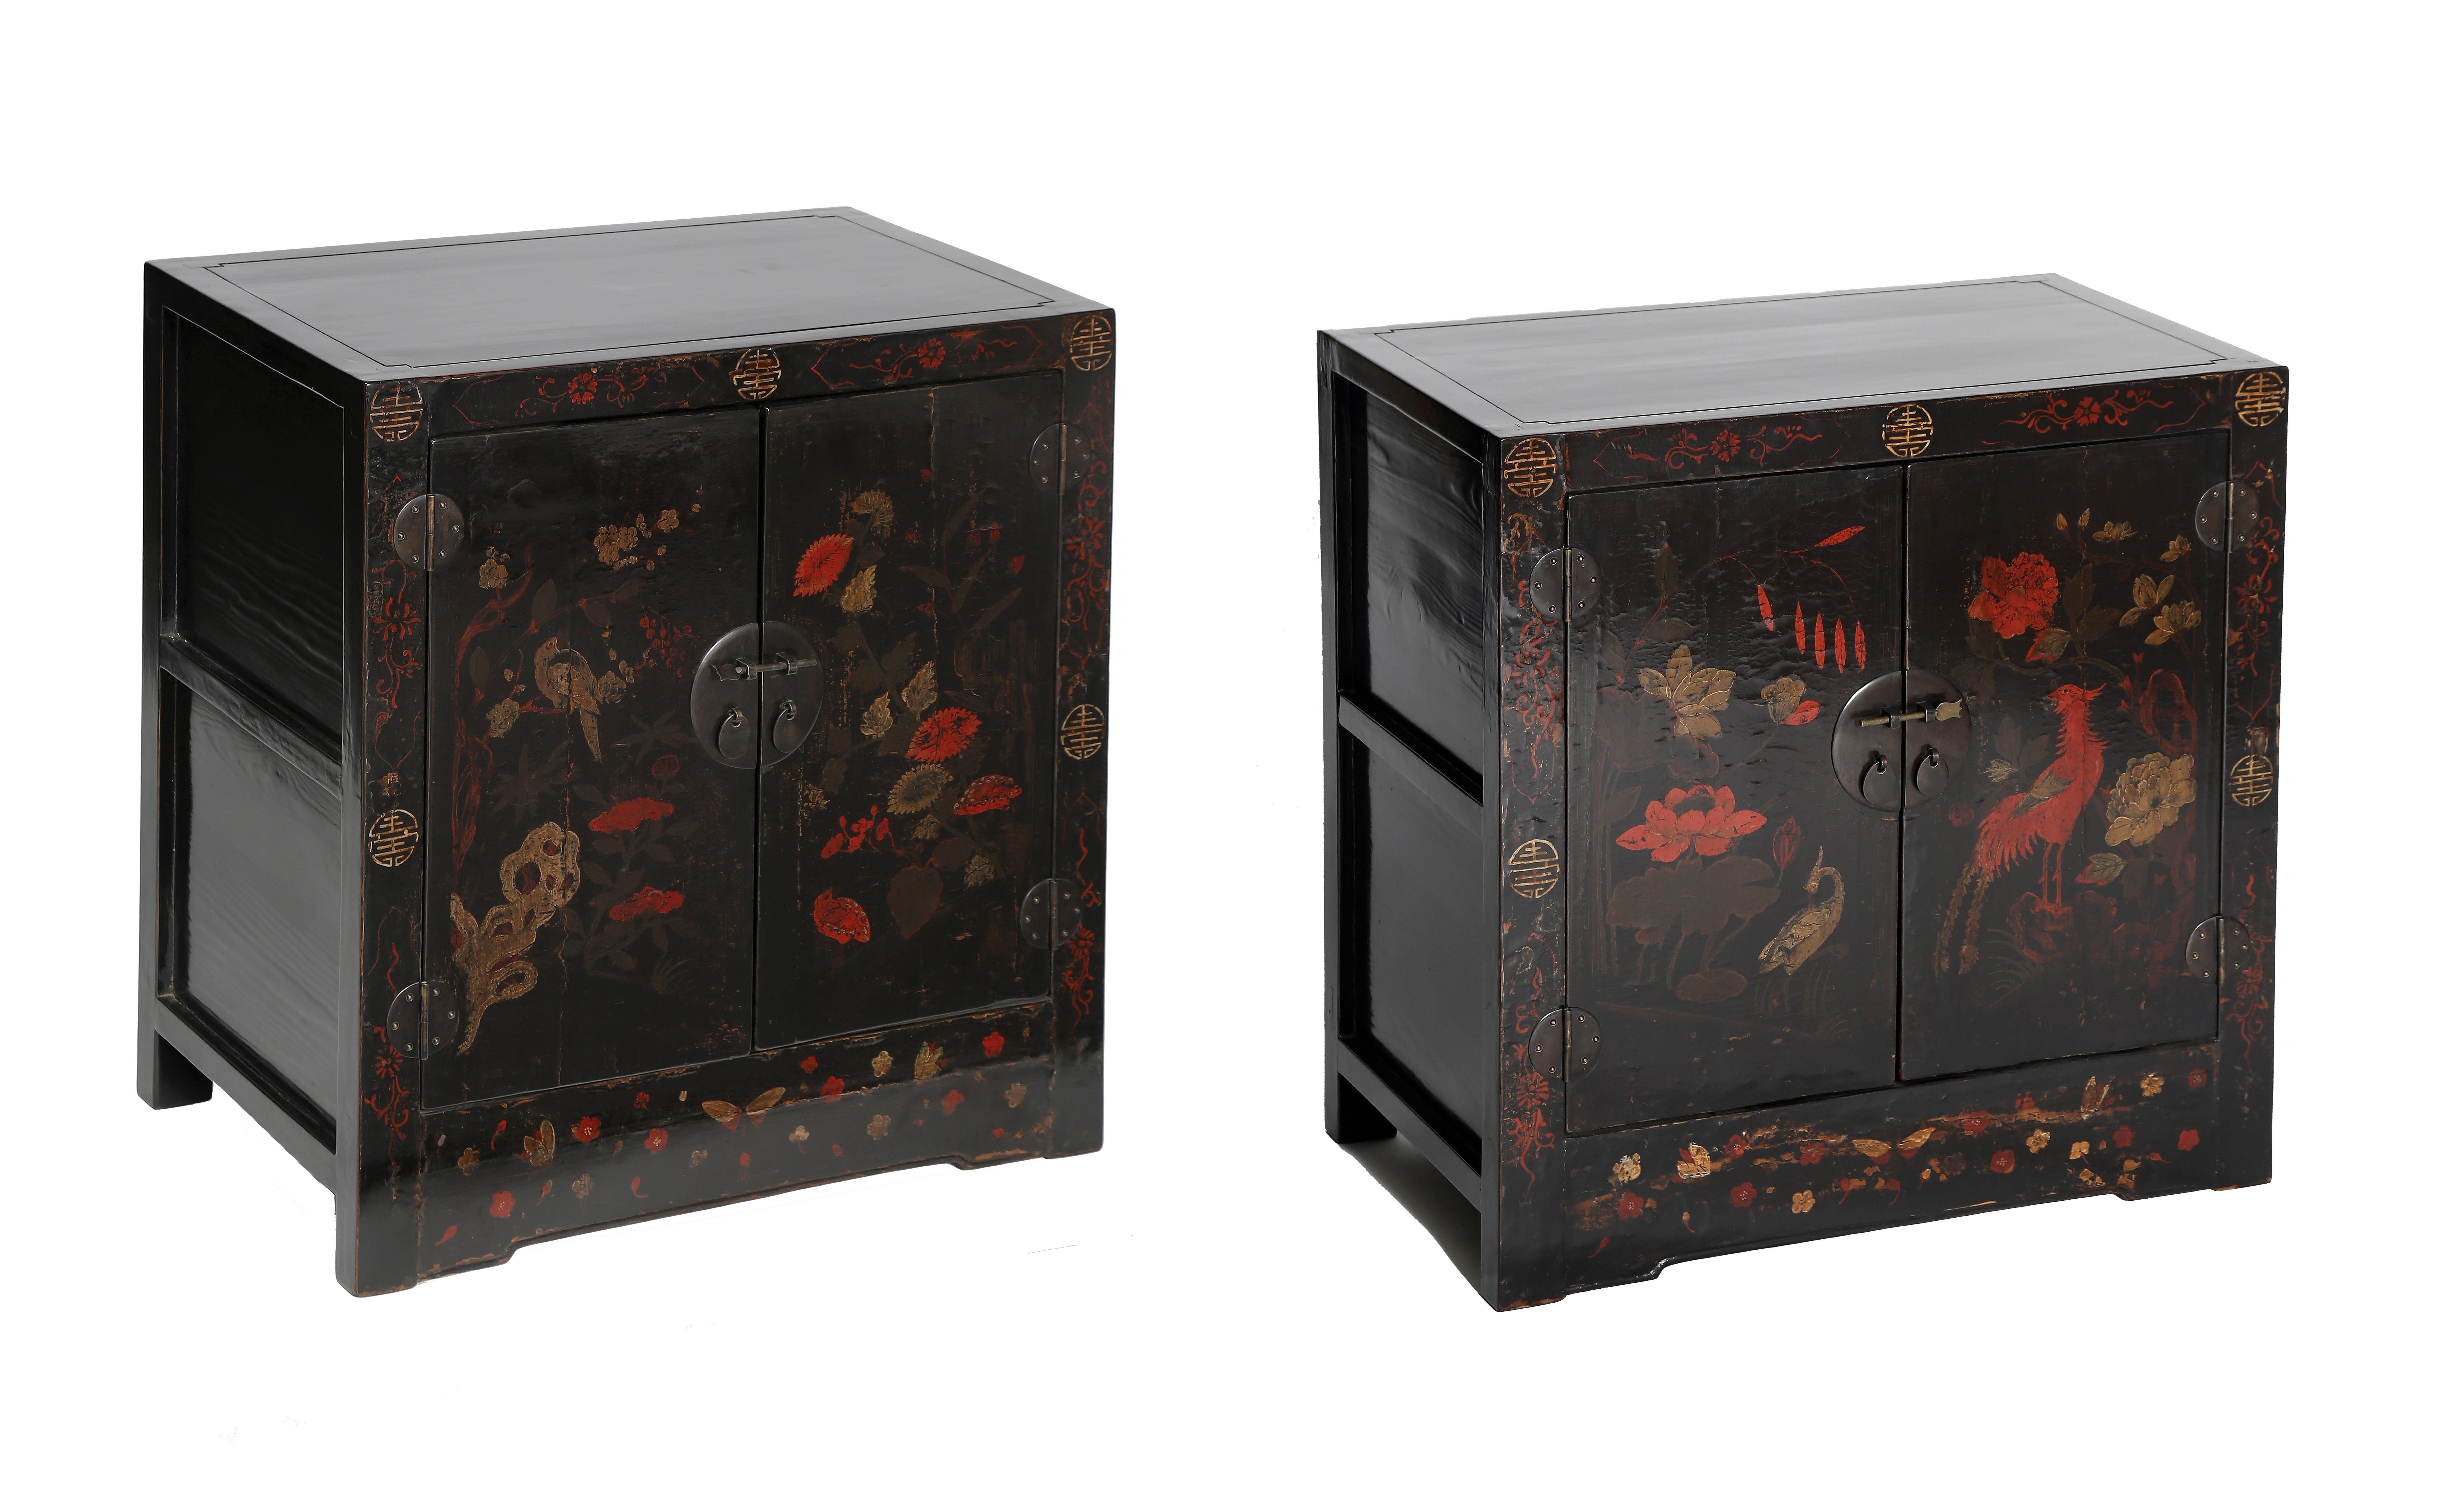 The pair of square corner cabinets with a pair of flush paneled doors decorated with Four Seasons’ floral and birds paintings in vivid polychrome lacquer, the rectangular-sectioned side posts painted with floral and longevity motifs, continuing to